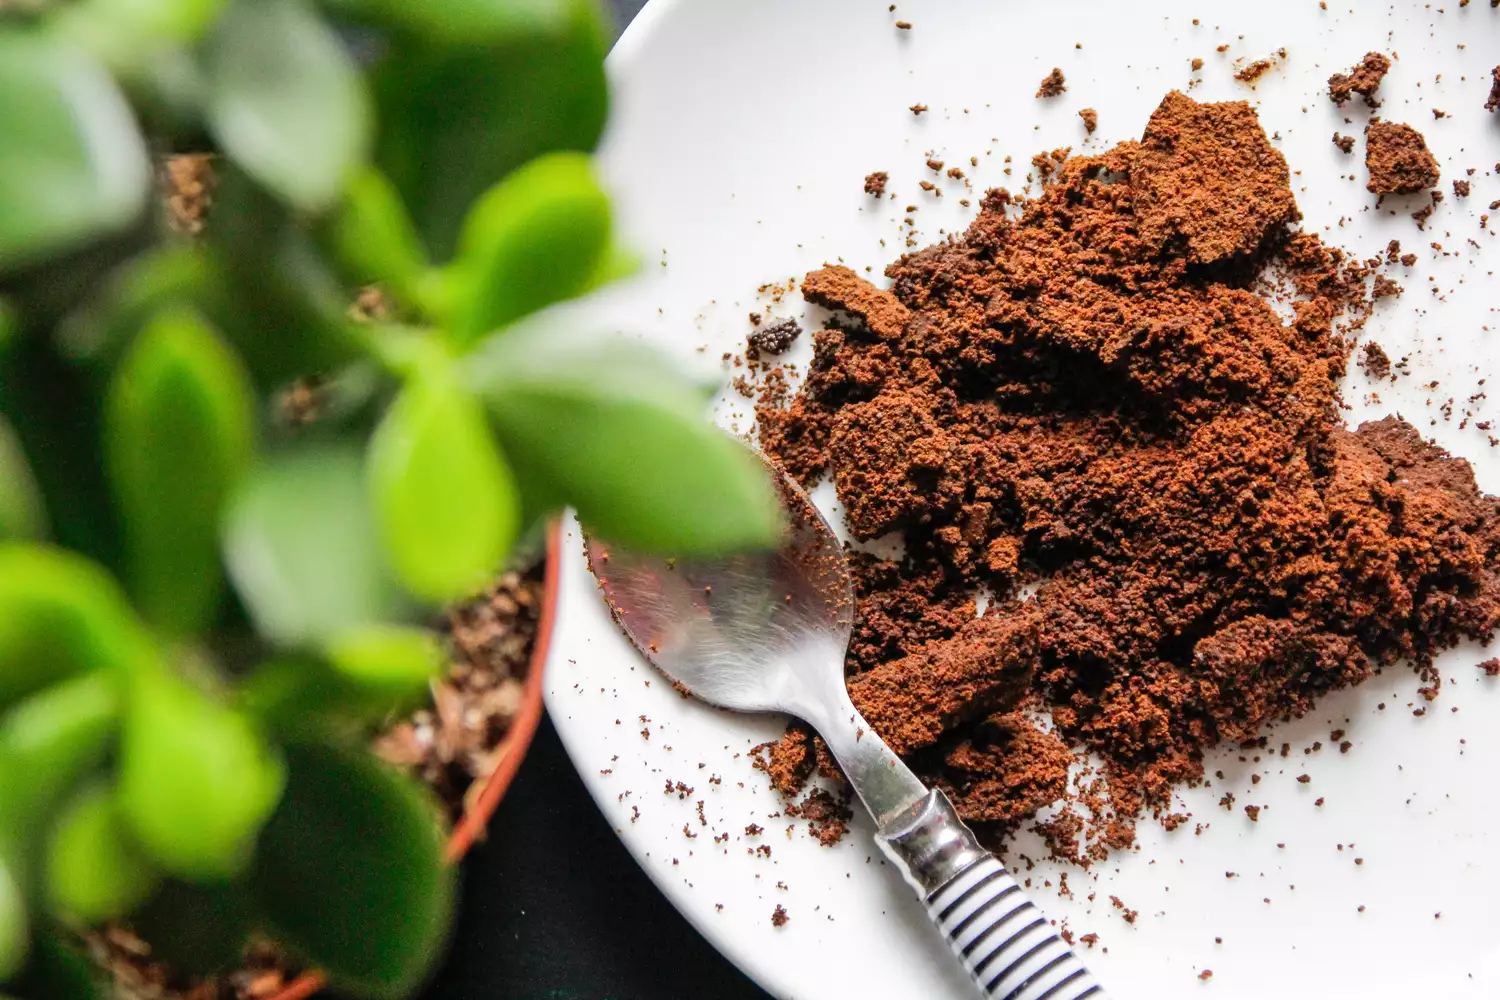 Can Coffee Really Improve Your Plants’ Health? Experts Weigh In